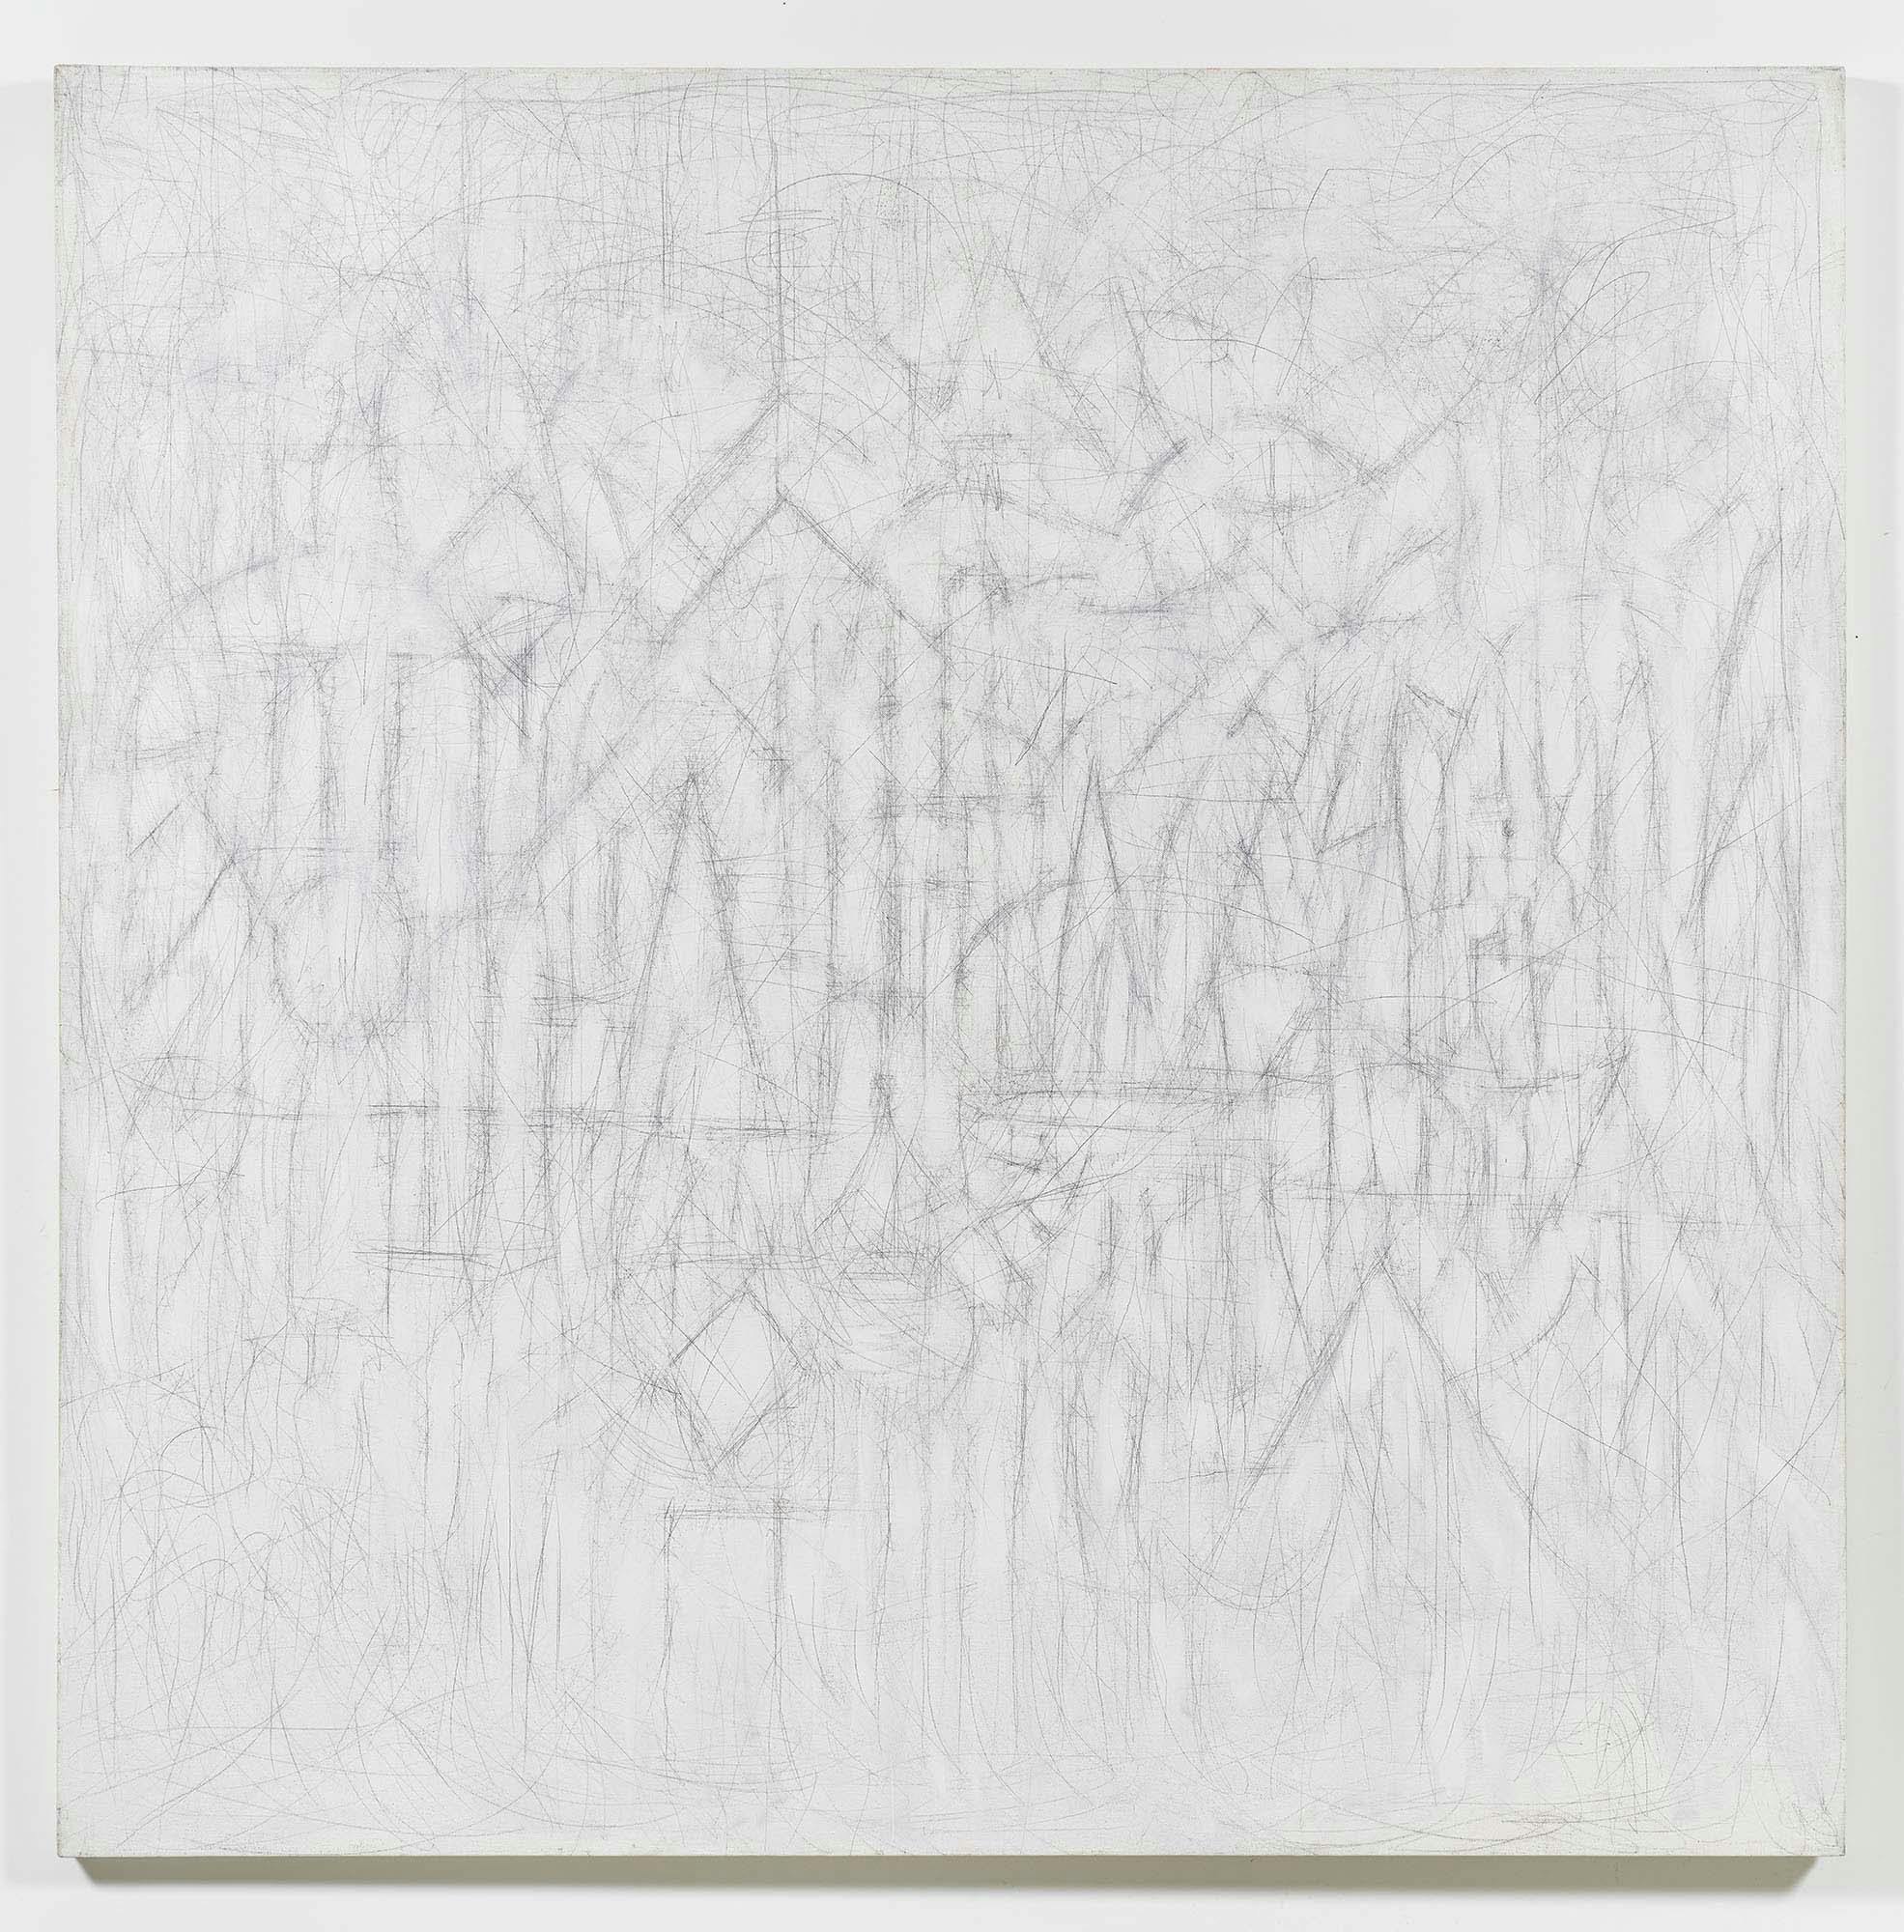 White Cathedral
1984–89
Oil and graphite on linen
90 x 90 in. (228.6 x 228.6 cm)
 – The Richard Pousette-Dart Foundation